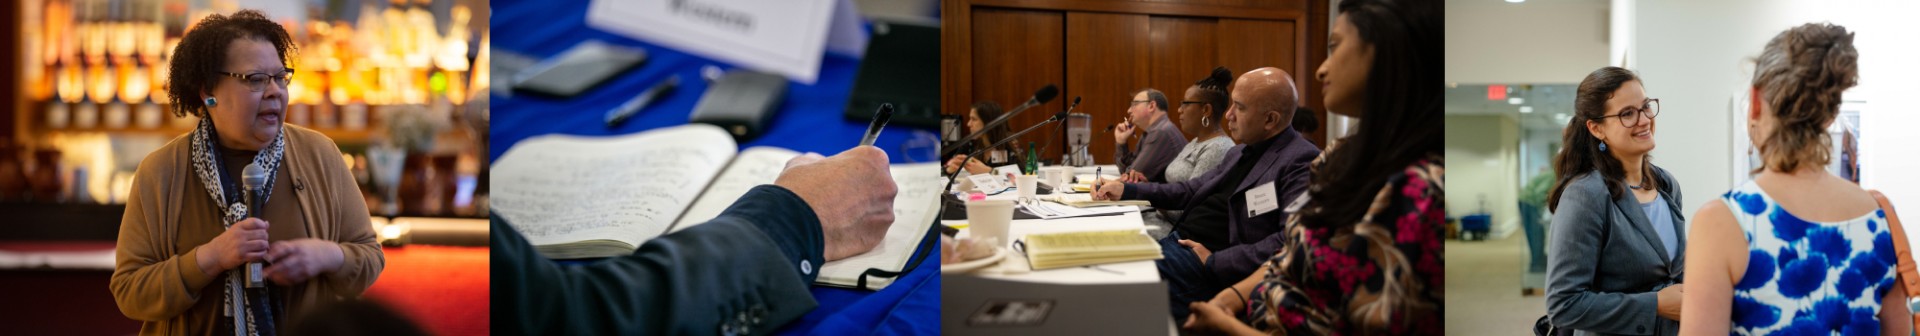 A bar of four images: far left, a picture of a speaker with a microphone, middle left, a hand writing in a notebook, middle right, a group of people taking notes at a round table, far right, two women speaking.